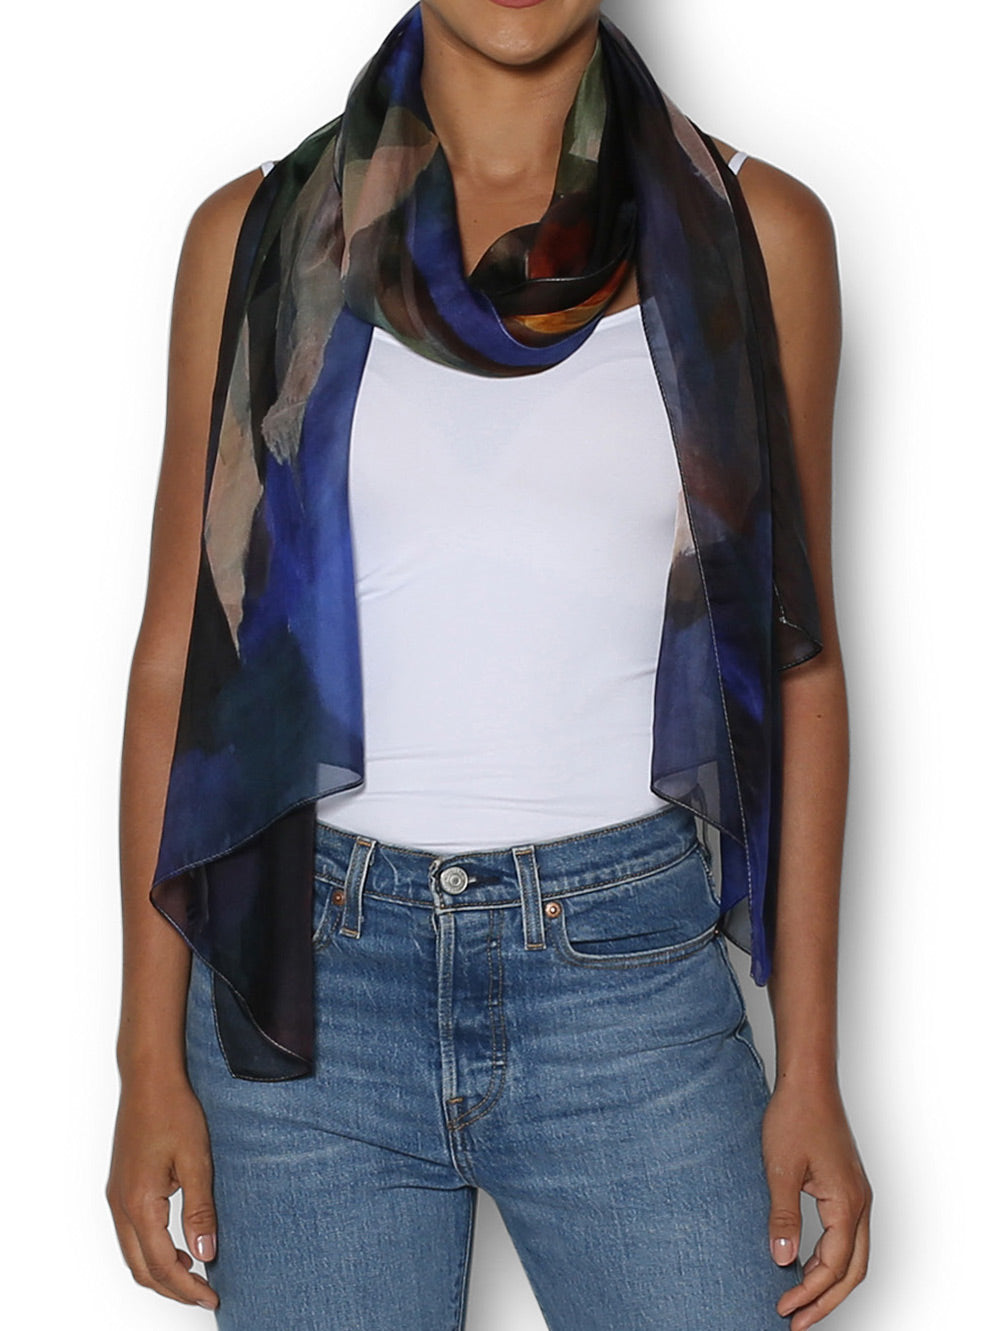 THE ARTISTS LABEL CALLA LILIES SILK SCARF